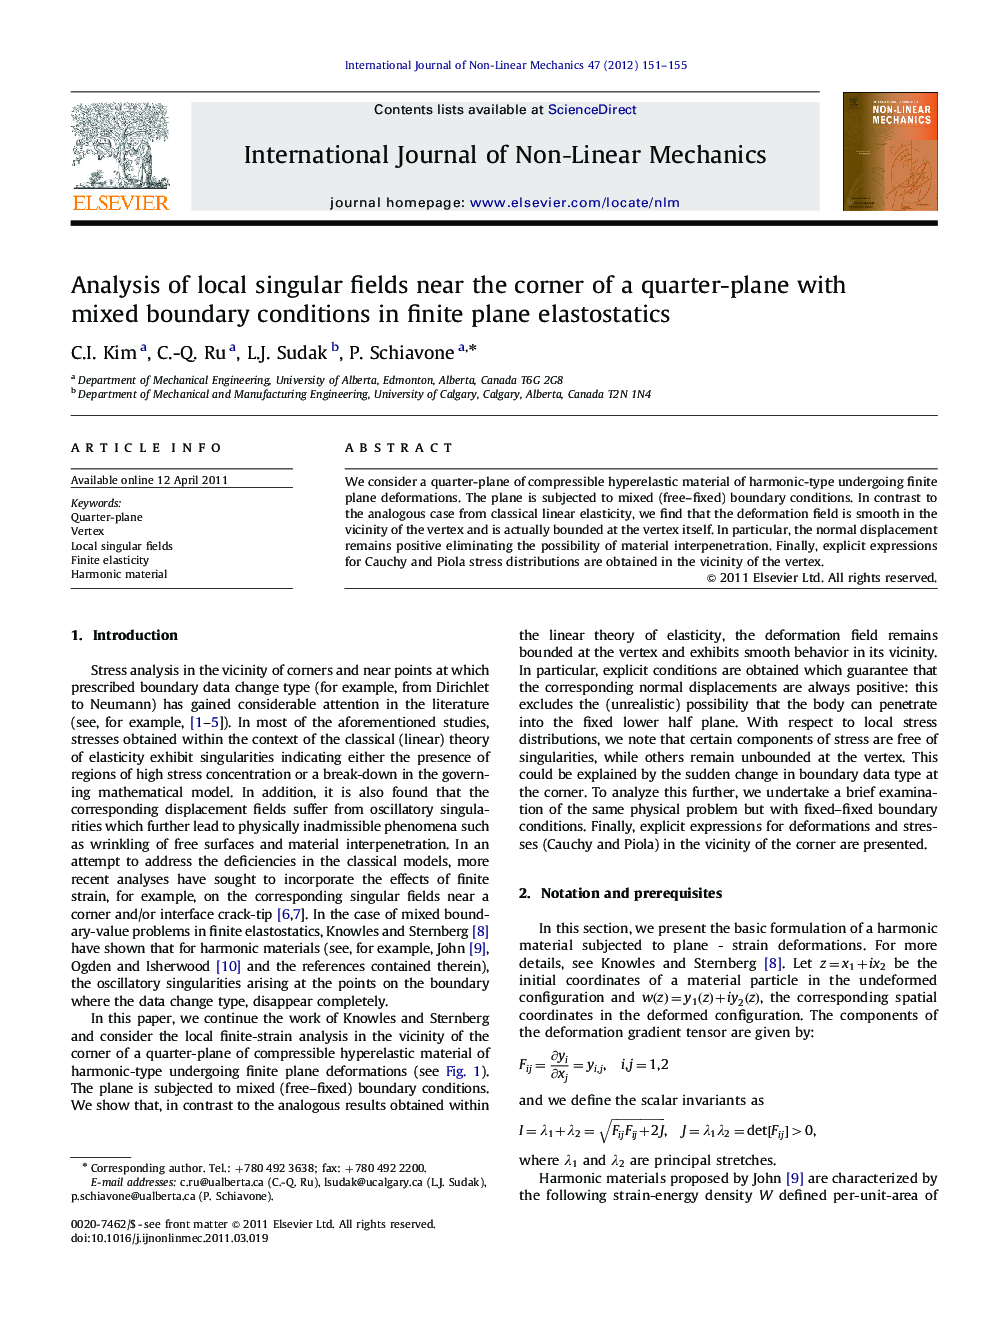 Analysis of local singular fields near the corner of a quarter-plane with mixed boundary conditions in finite plane elastostatics